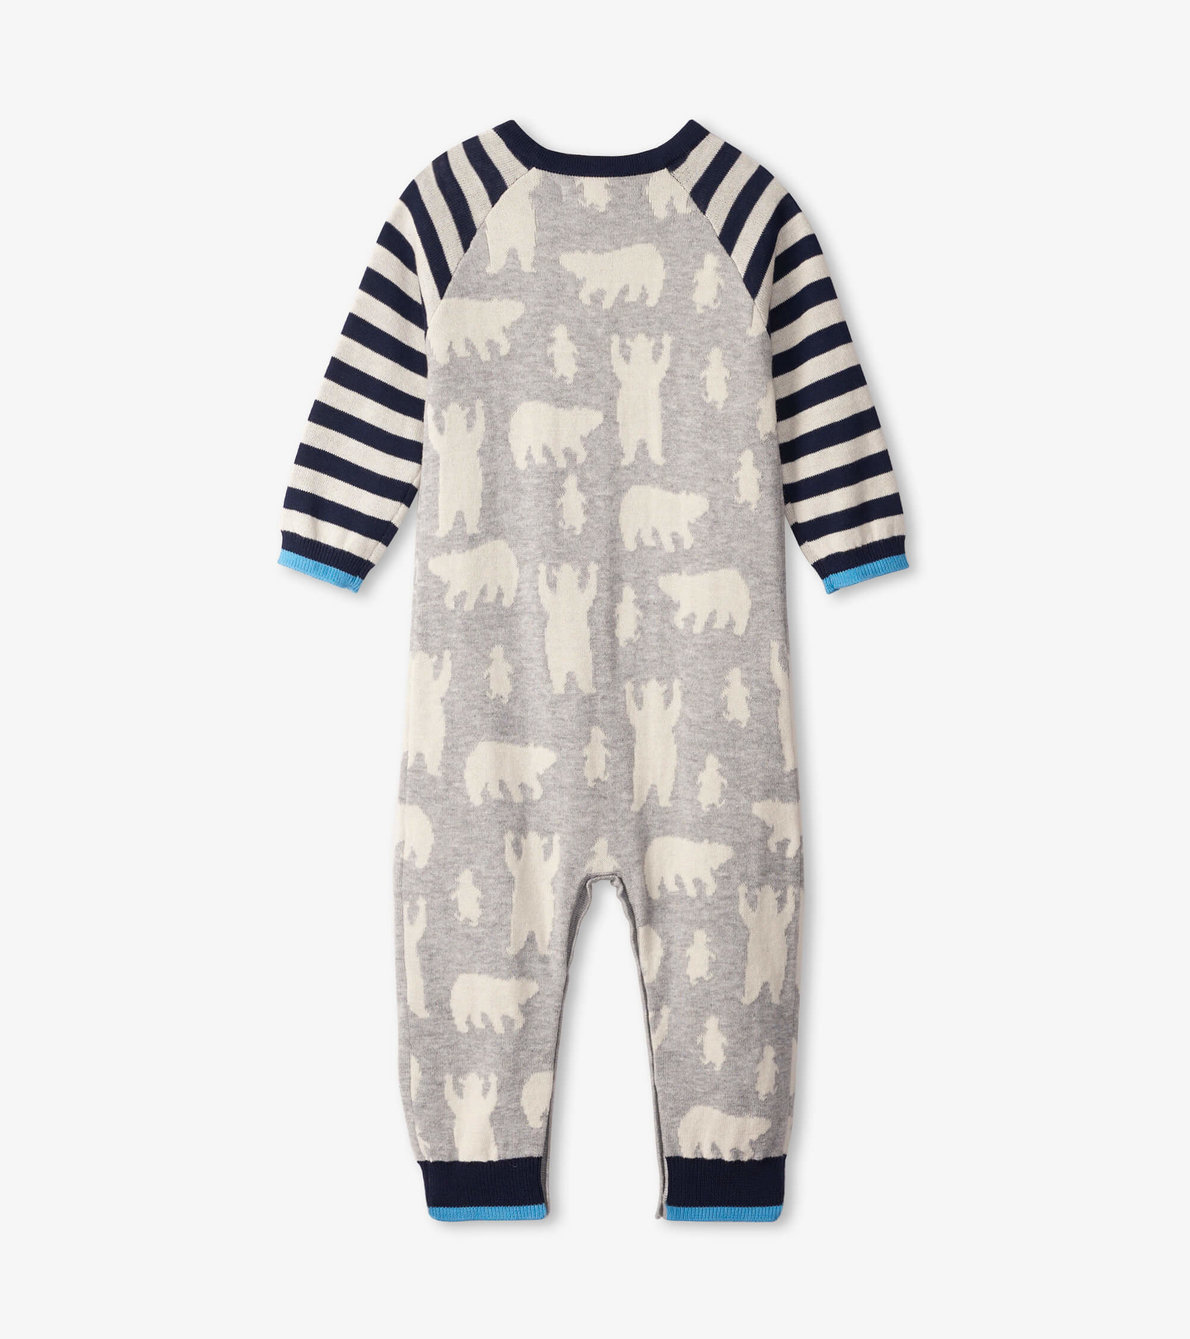 View larger image of Polar Bear Silhouette Baby Sweater Romper